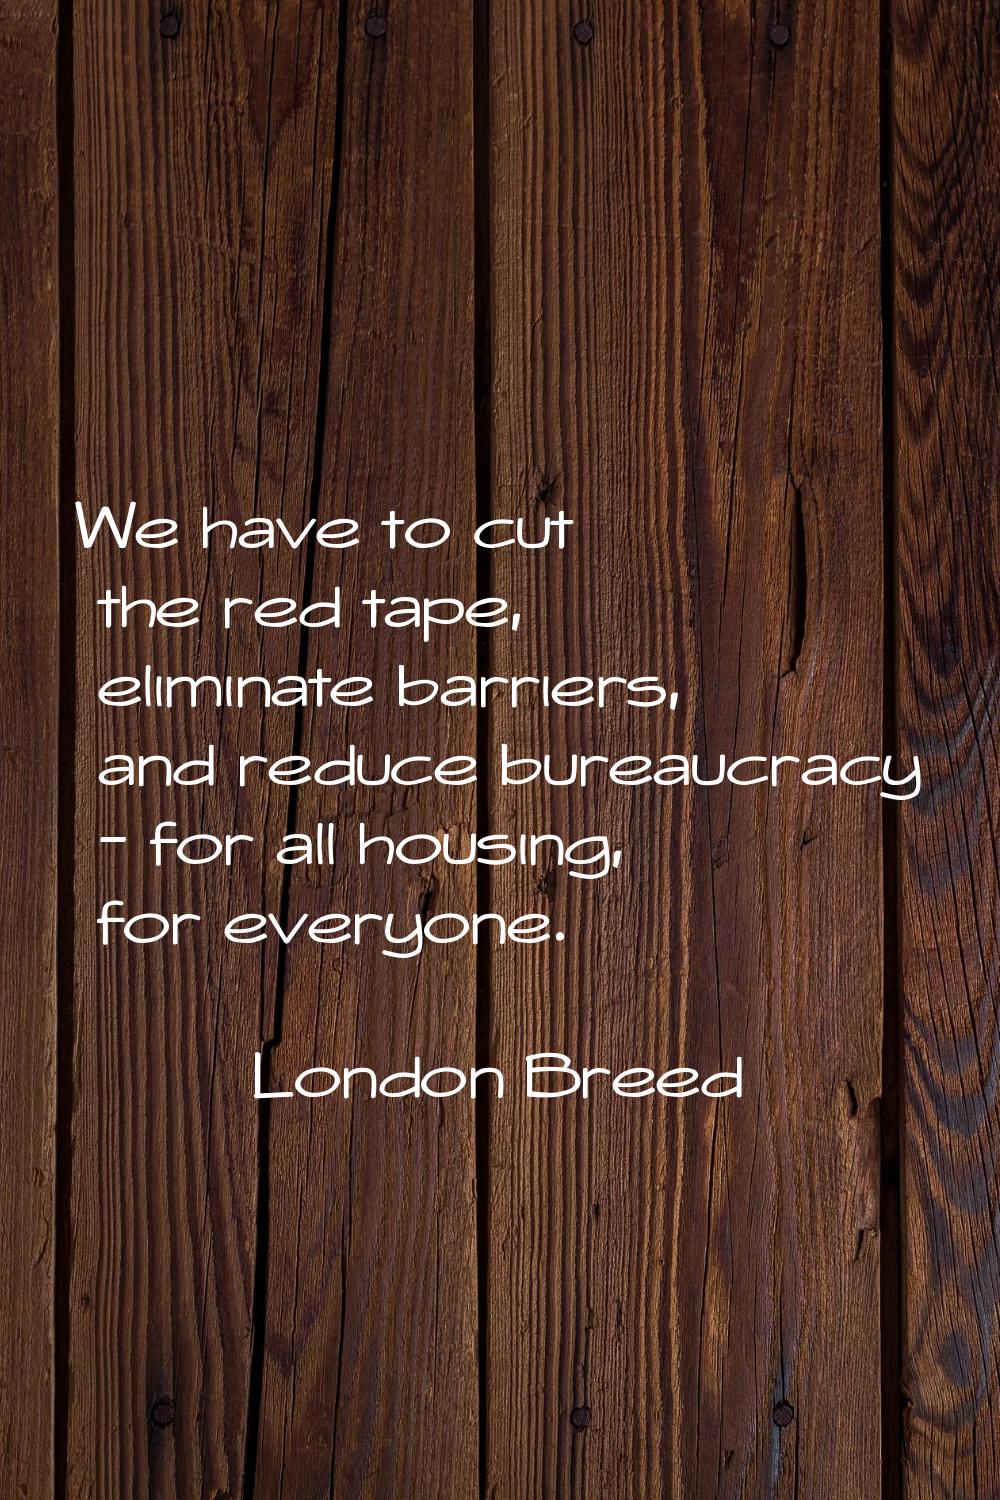 We have to cut the red tape, eliminate barriers, and reduce bureaucracy - for all housing, for ever